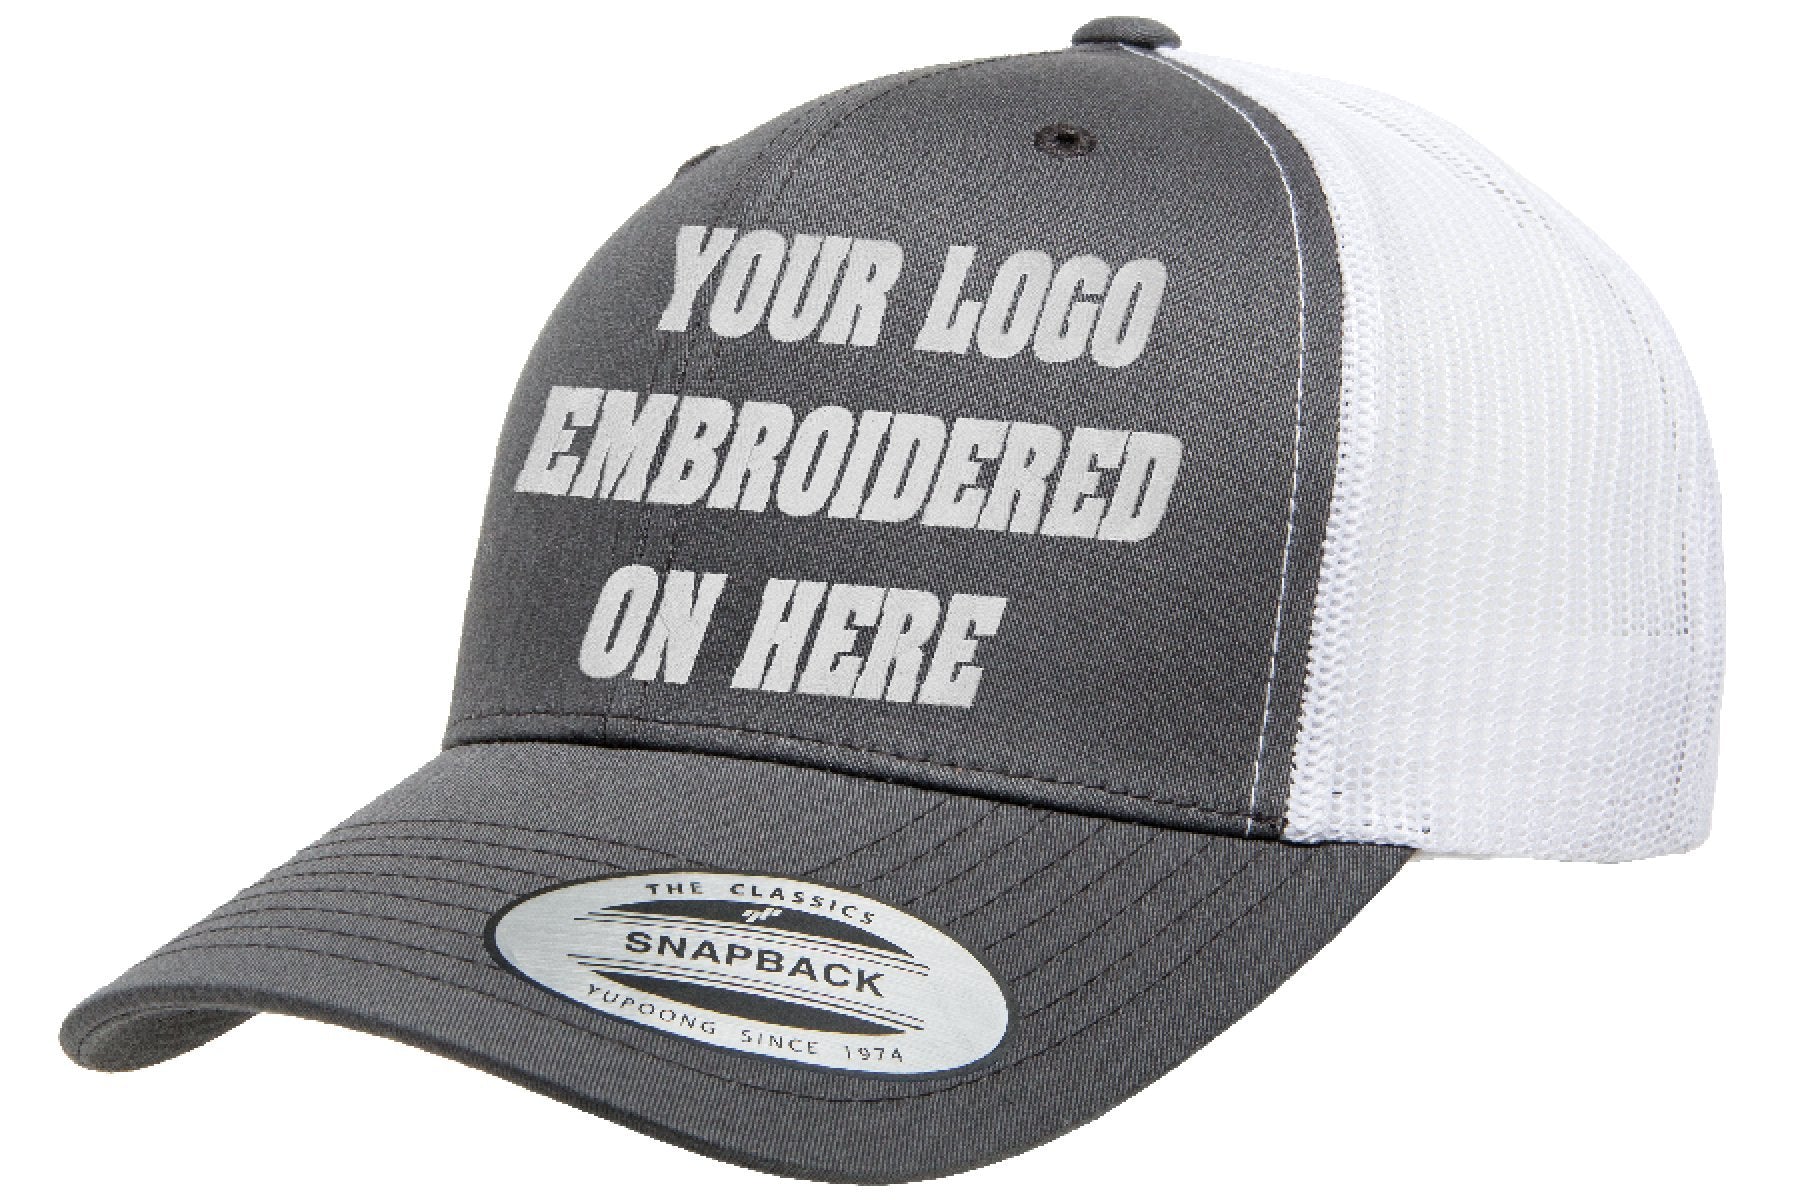 Branded custom embroidered cap.